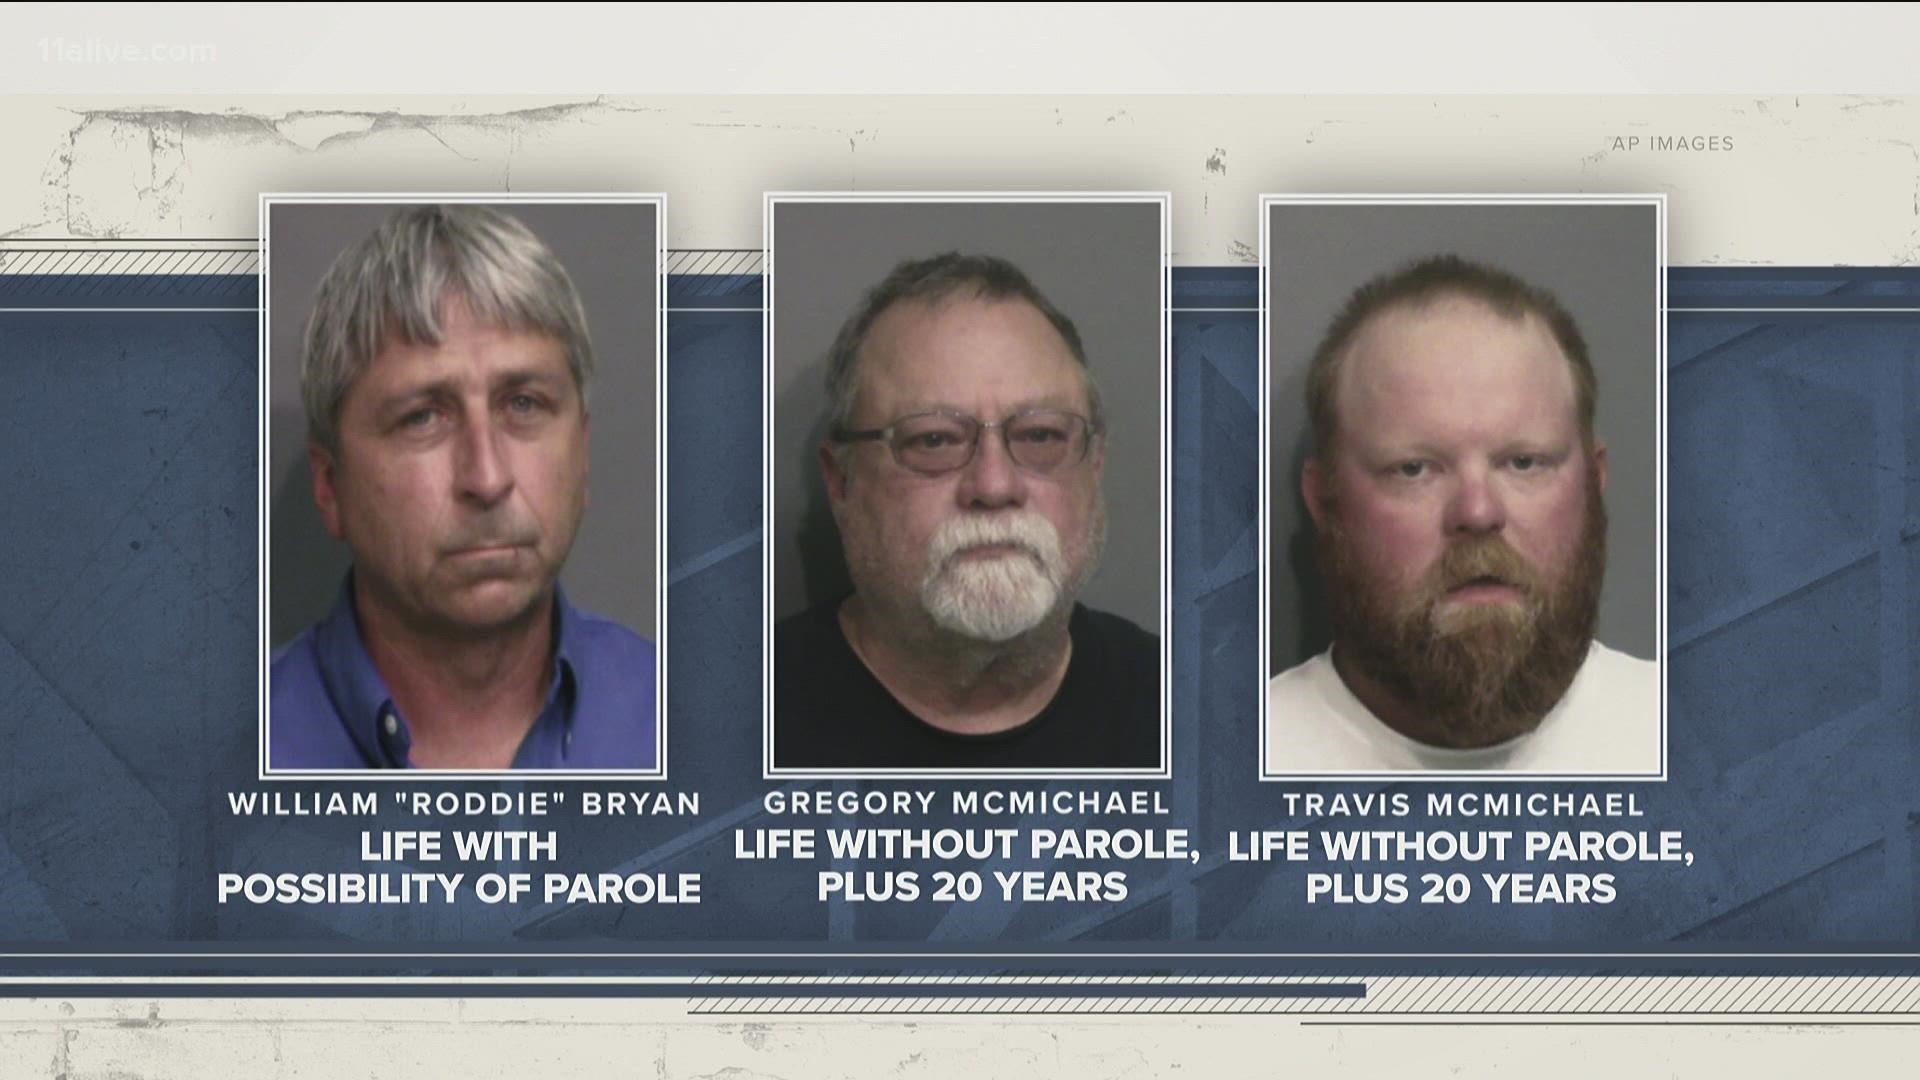 Travis and Greg McMichael got life without parole on Friday, while William "Roddie" Bryan got life with parole.